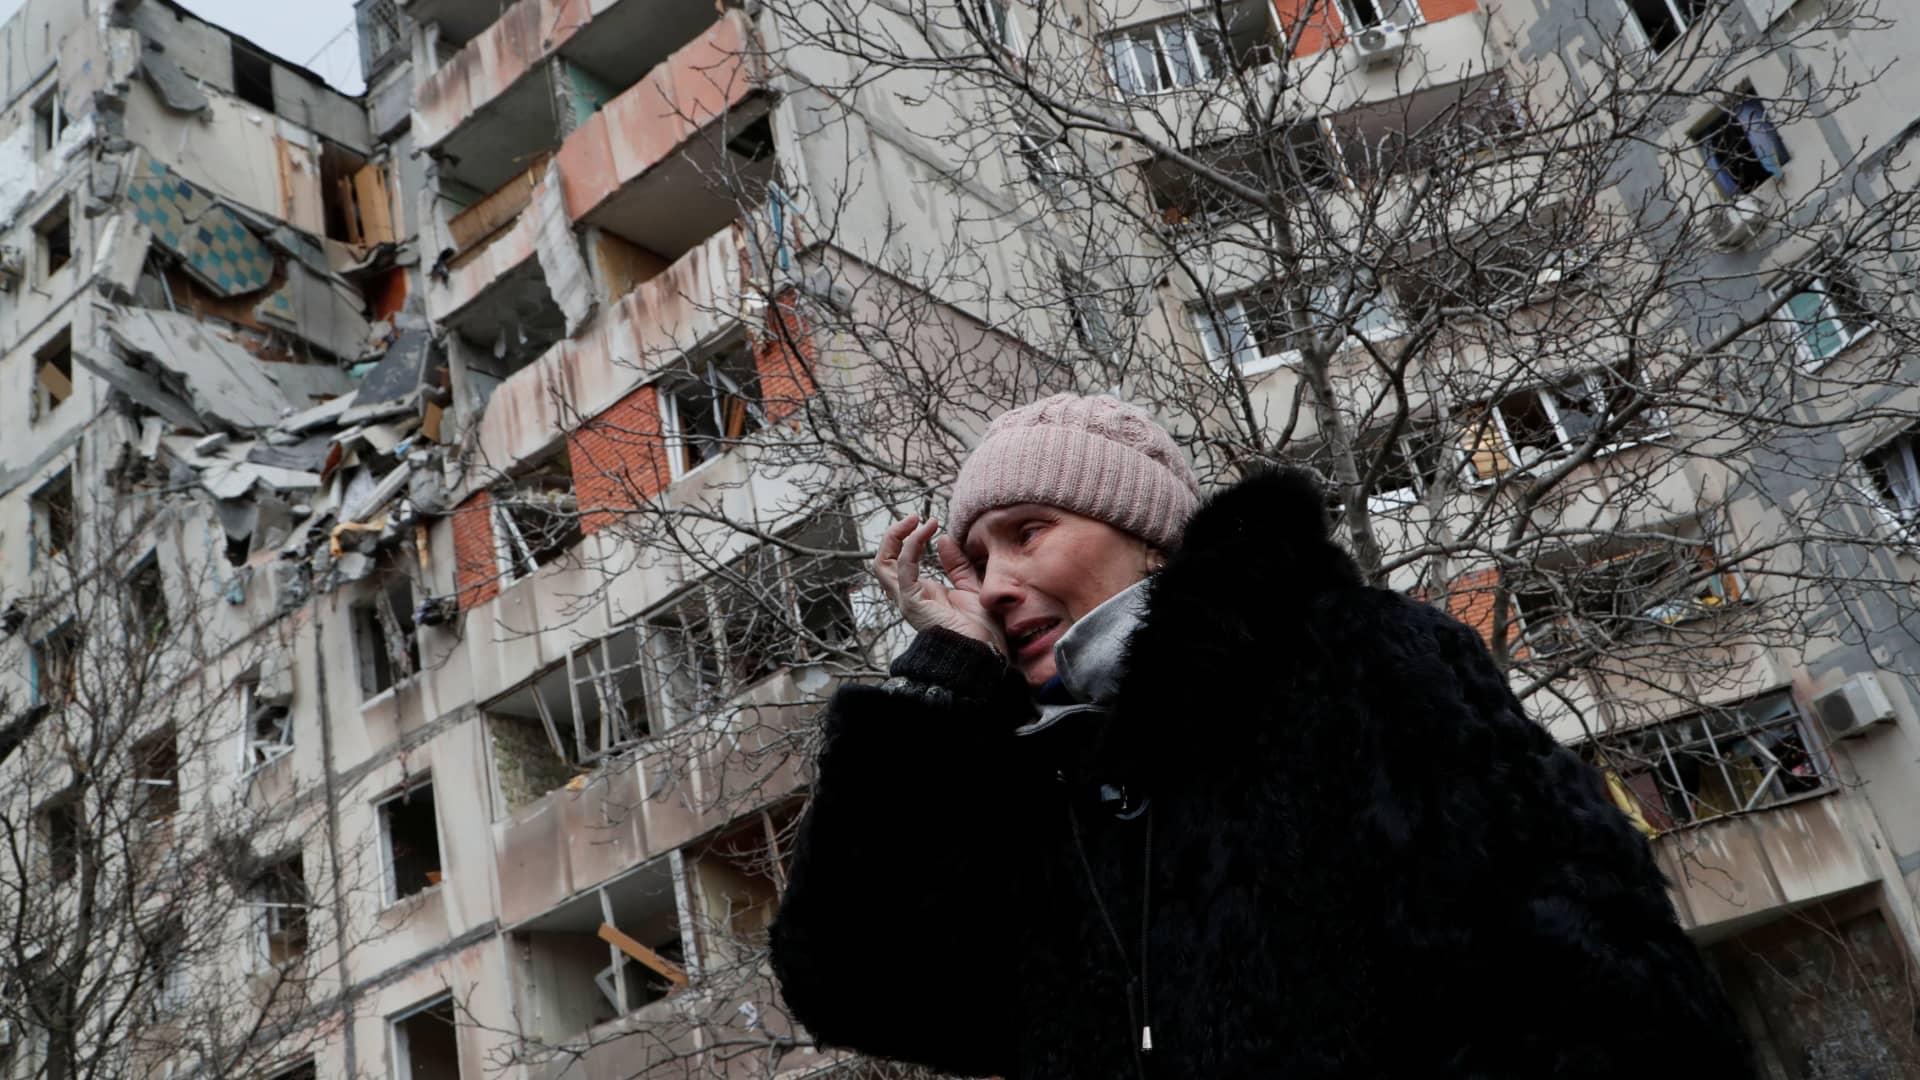 A woman reacts while speaking near a block of flats, which was destroyed during Ukraine-Russia conflict in the besieged southern port city of Mariupol, Ukraine March 17, 2022.